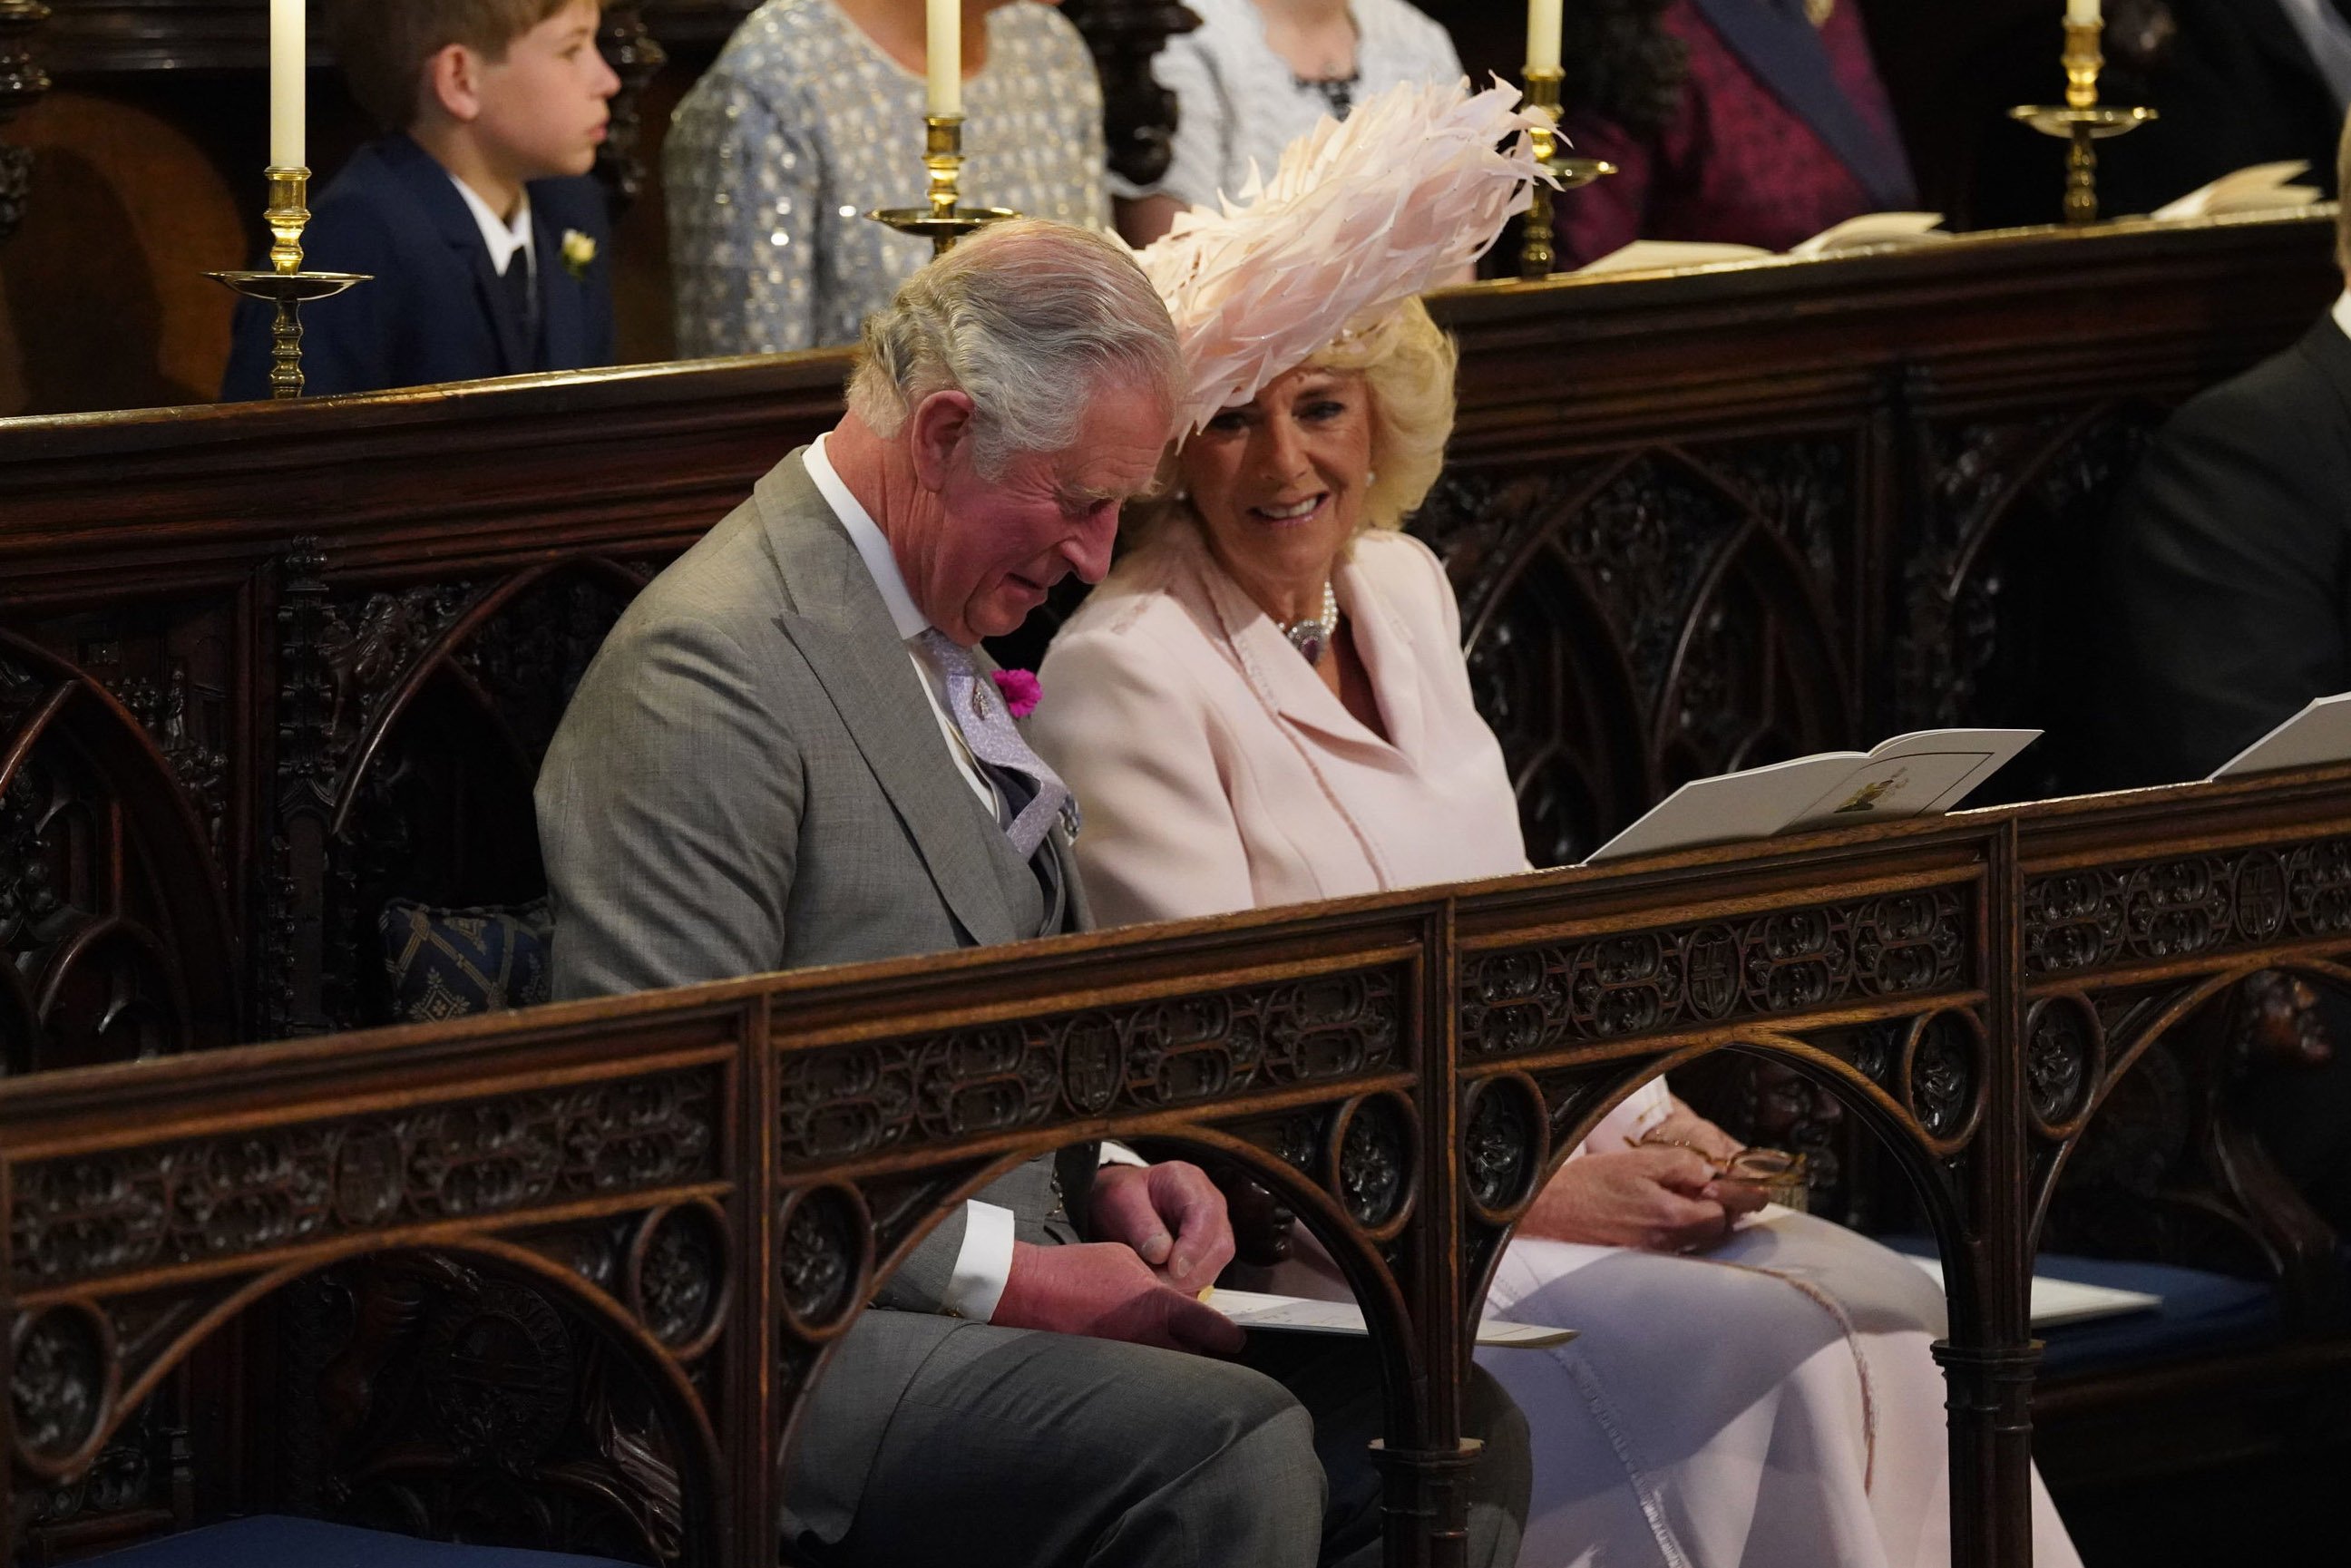 King Charles III and Queen Consort Camilla in London 2018. | Source: Getty Images